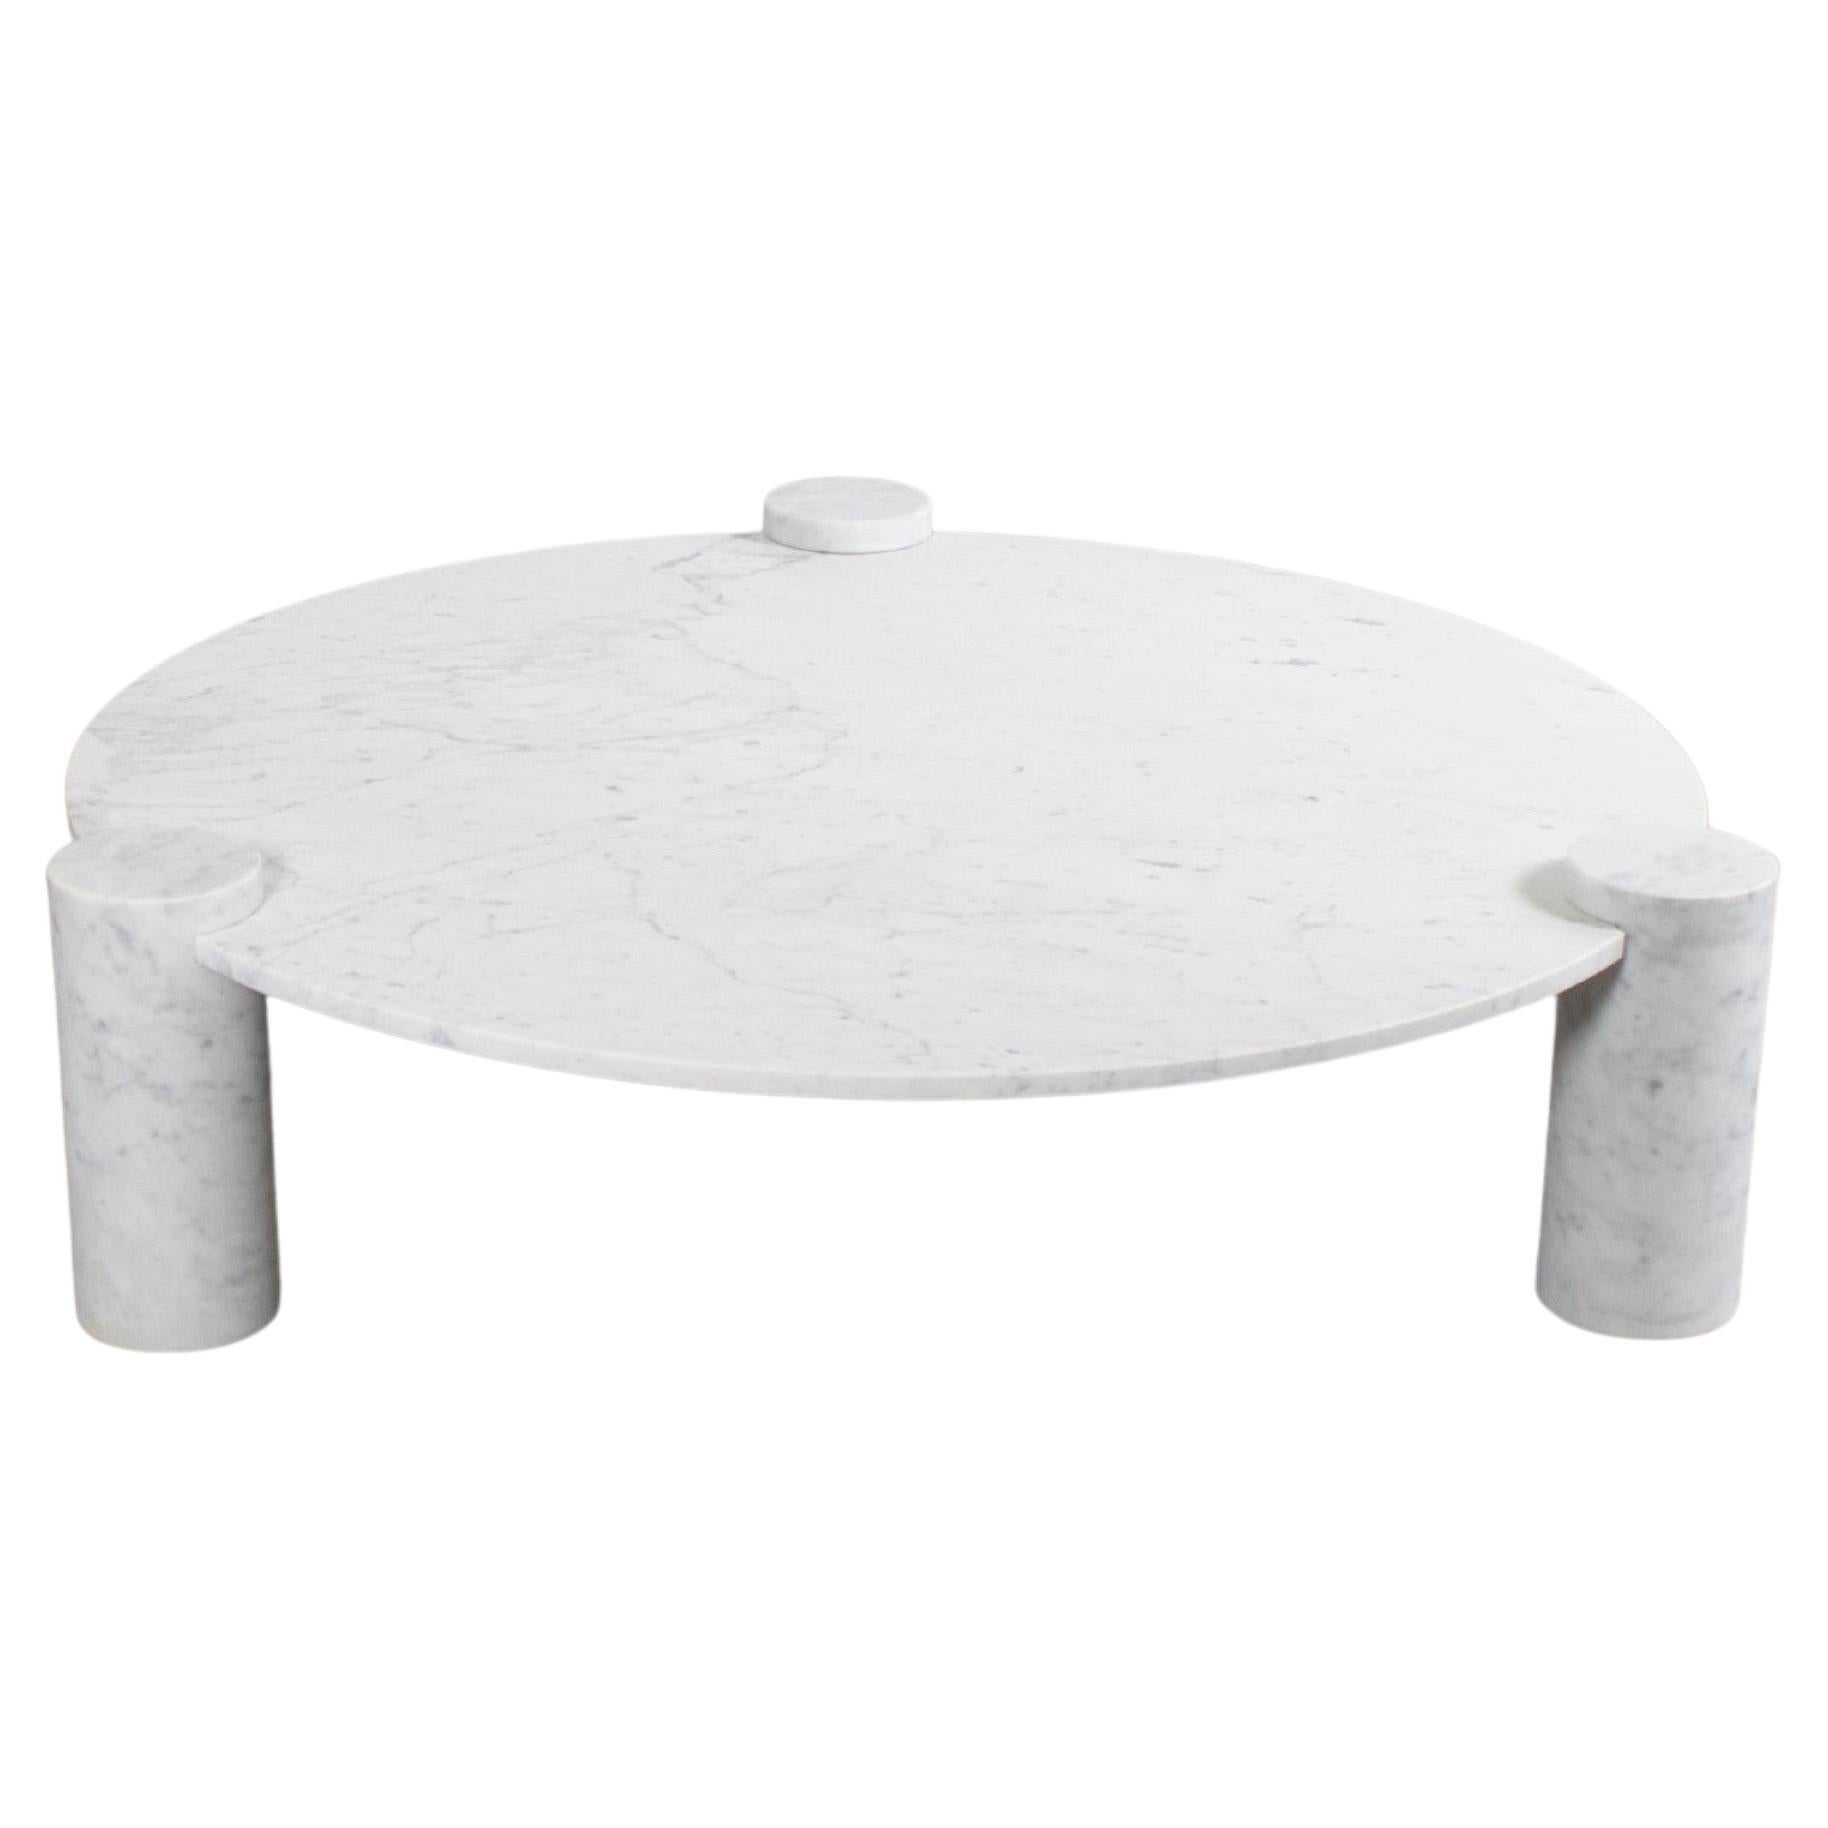 Large Impressive Carrara Marble Coffee Table Made in Italy, 1970s For Sale